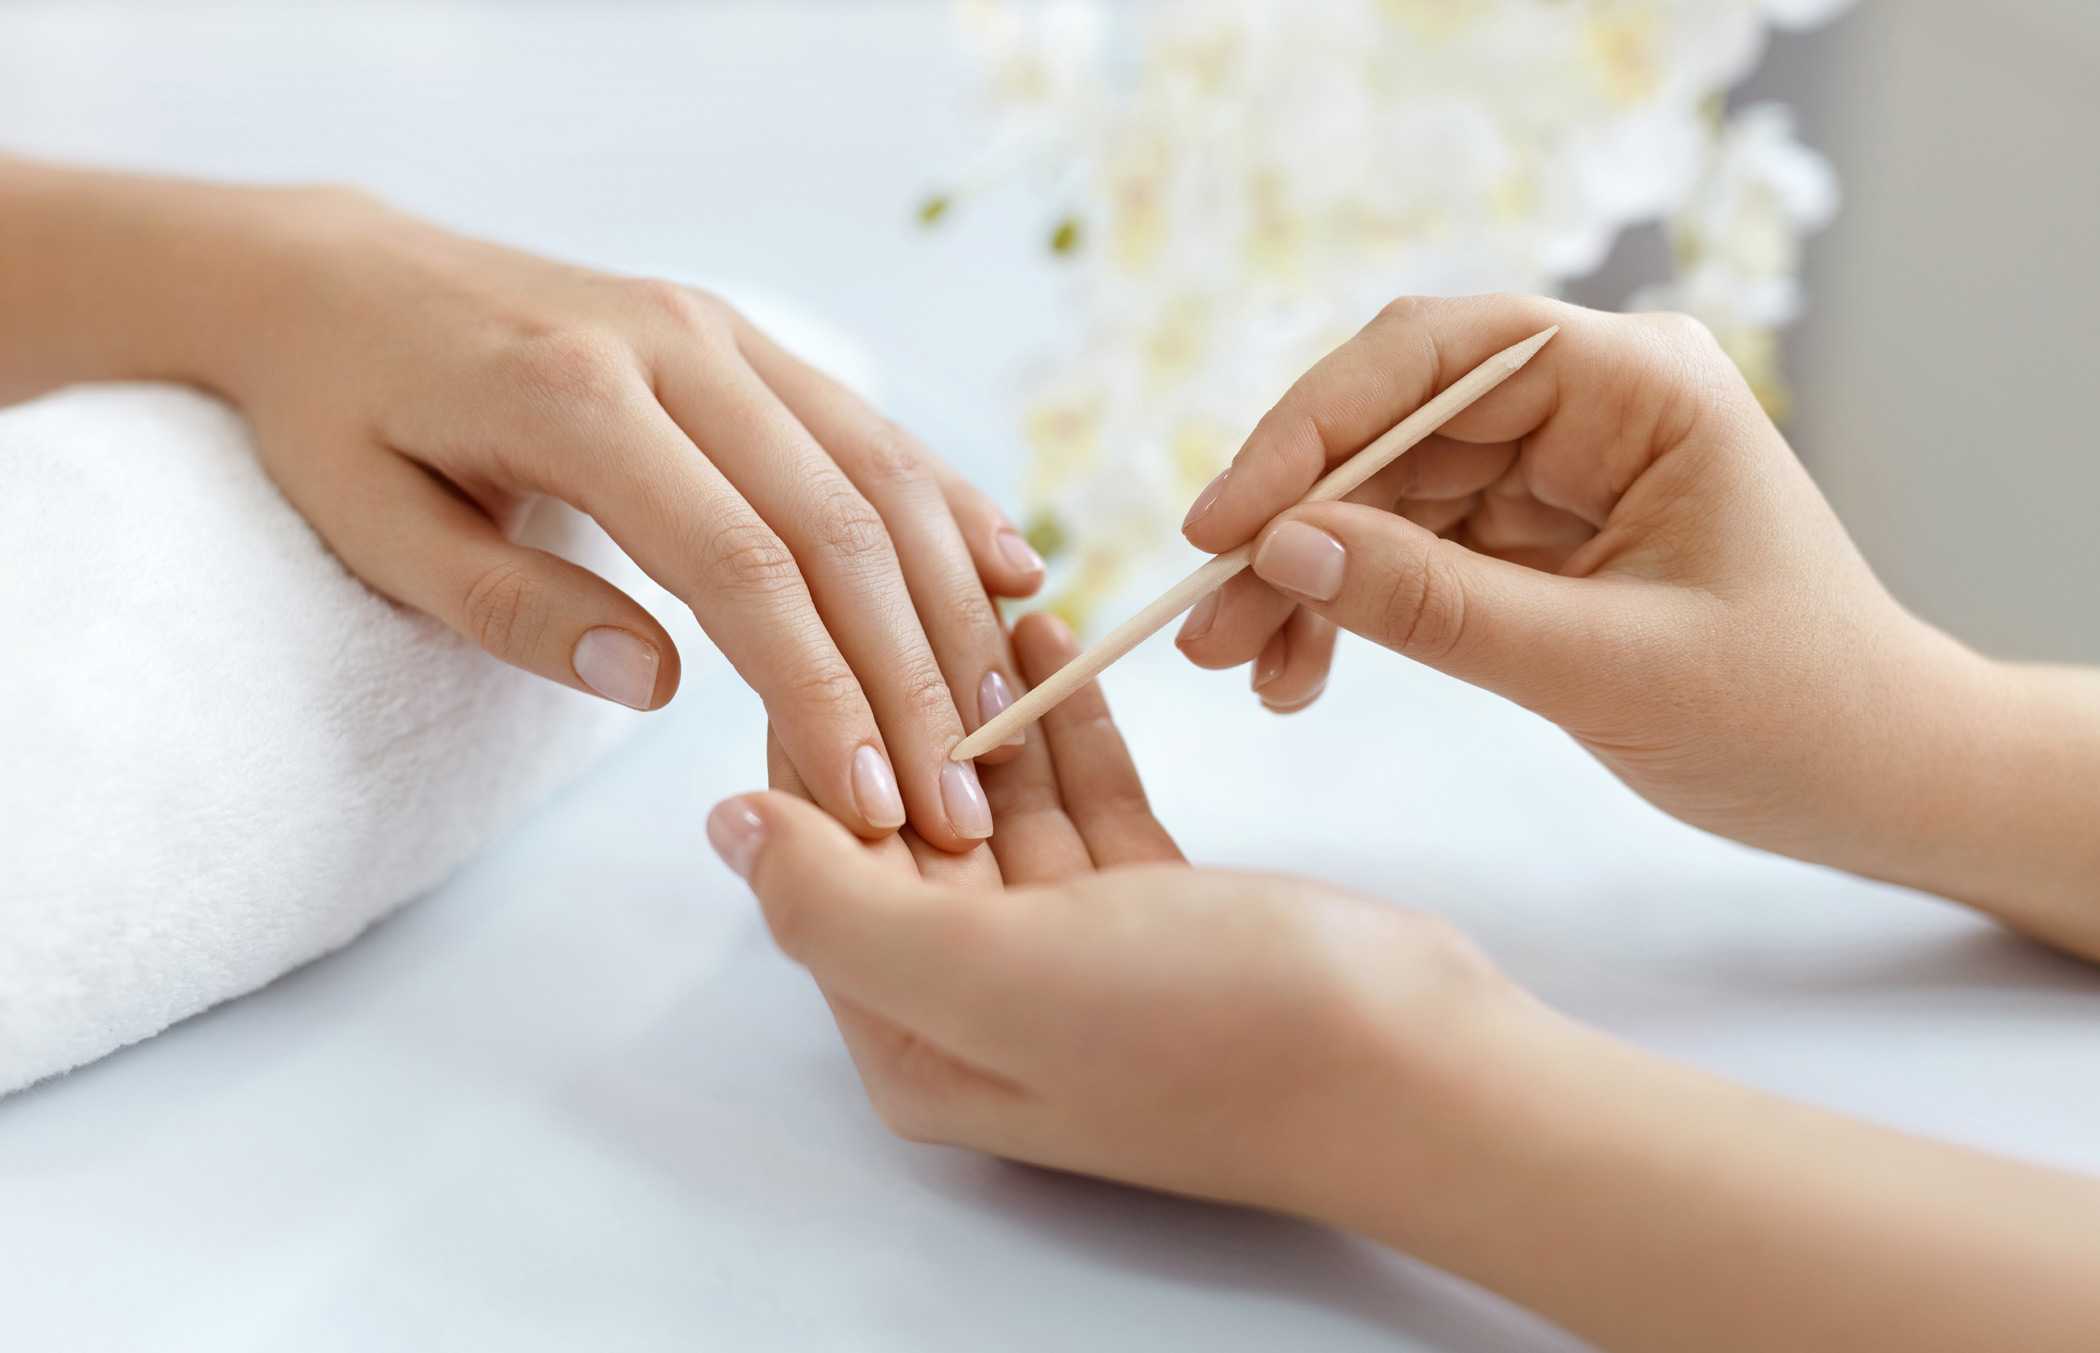 A woman receiving a manicure